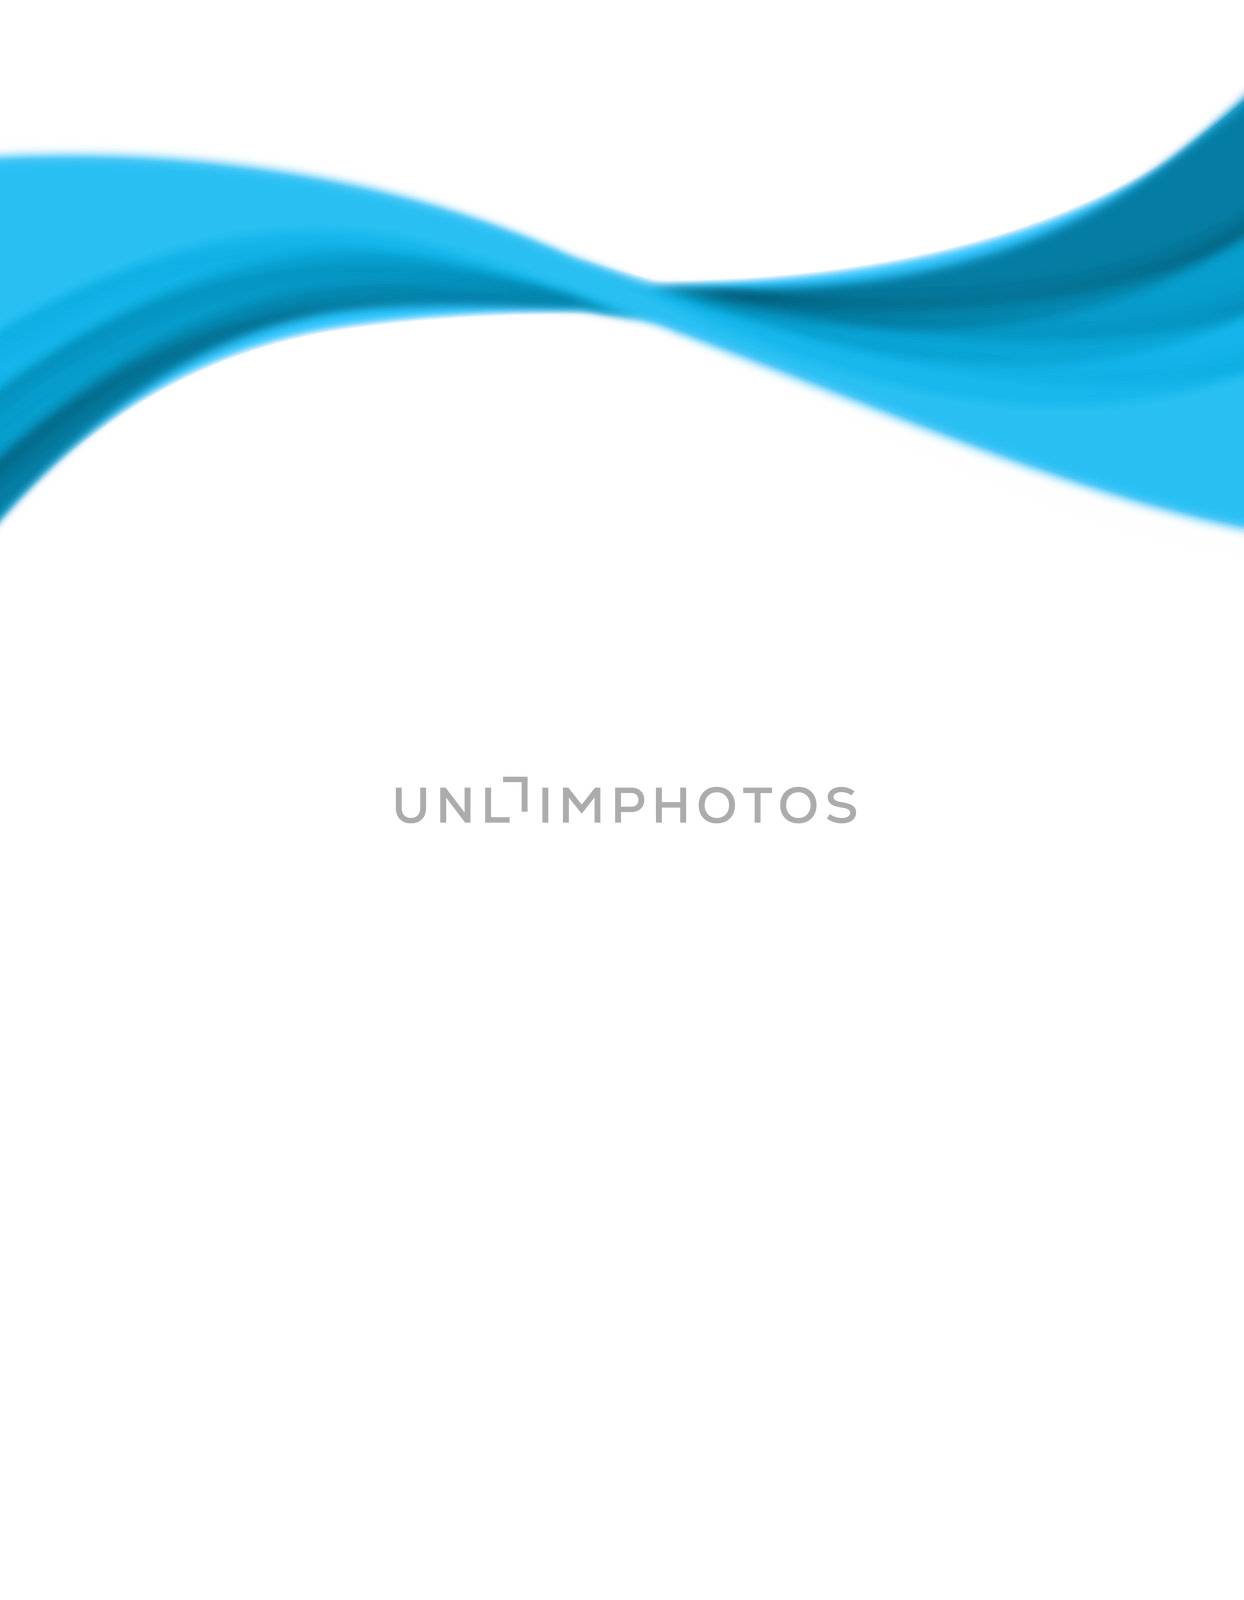 A wavy abstract layout - great for use as a design template or background.